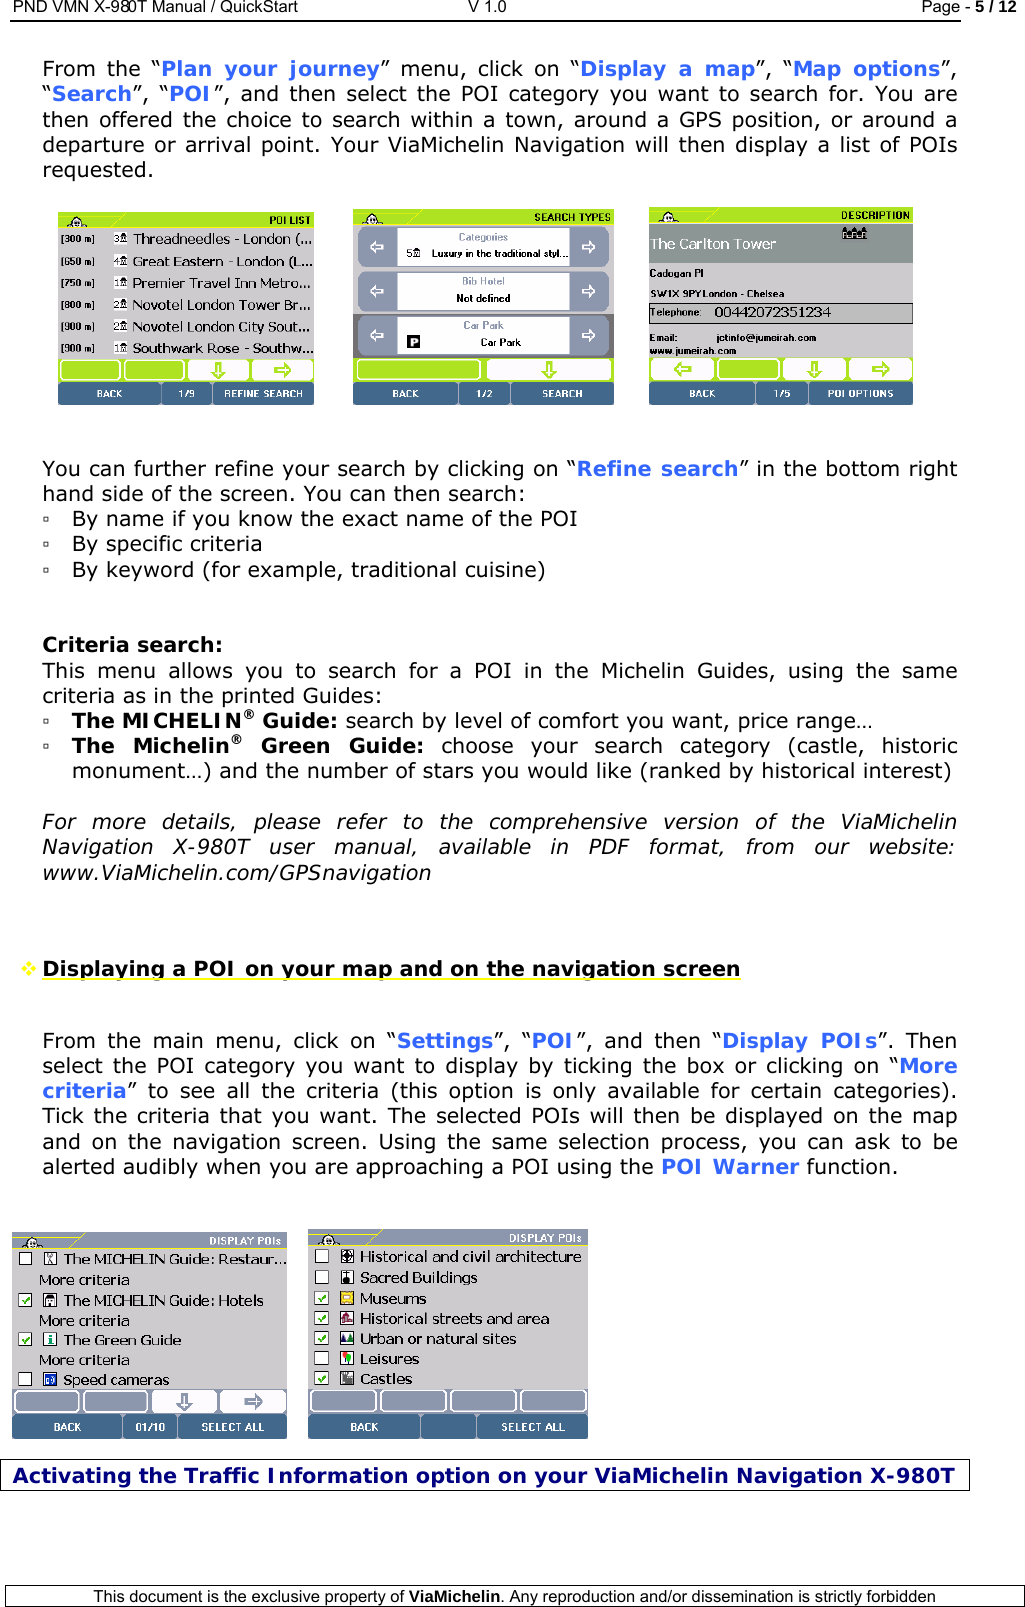 PND VMN X-980T Manual / QuickStart   V 1.0  Page - 5 / 12  This document is the exclusive property of ViaMichelin. Any reproduction and/or dissemination is strictly forbidden  From the “Plan your journey” menu, click on “Display a map”, “Map options”, “Search”, “POI”, and then select the POI category you want to search for. You are then offered the choice to search within a town, around a GPS position, or around a departure or arrival point. Your ViaMichelin Navigation will then display a list of POIs requested.         You can further refine your search by clicking on “Refine search” in the bottom right hand side of the screen. You can then search: ▫ By name if you know the exact name of the POI ▫ By specific criteria ▫ By keyword (for example, traditional cuisine)   Criteria search: This menu allows you to search for a POI in the Michelin Guides, using the same criteria as in the printed Guides: ▫ The MICHELIN® Guide: search by level of comfort you want, price range… ▫ The Michelin® Green Guide: choose your search category (castle, historic monument…) and the number of stars you would like (ranked by historical interest)  For more details, please refer to the comprehensive version of the ViaMichelin Navigation X-980T user manual, available in PDF format, from our website: www.ViaMichelin.com/GPSnavigation    Displaying a POI on your map and on the navigation screen  From the main menu, click on “Settings”, “POI”, and then “Display POIs”. Then select the POI category you want to display by ticking the box or clicking on “More criteria” to see all the criteria (this option is only available for certain categories). Tick the criteria that you want. The selected POIs will then be displayed on the map and on the navigation screen. Using the same selection process, you can ask to be alerted audibly when you are approaching a POI using the POI Warner function.        Activating the Traffic Information option on your ViaMichelin Navigation X-980T  